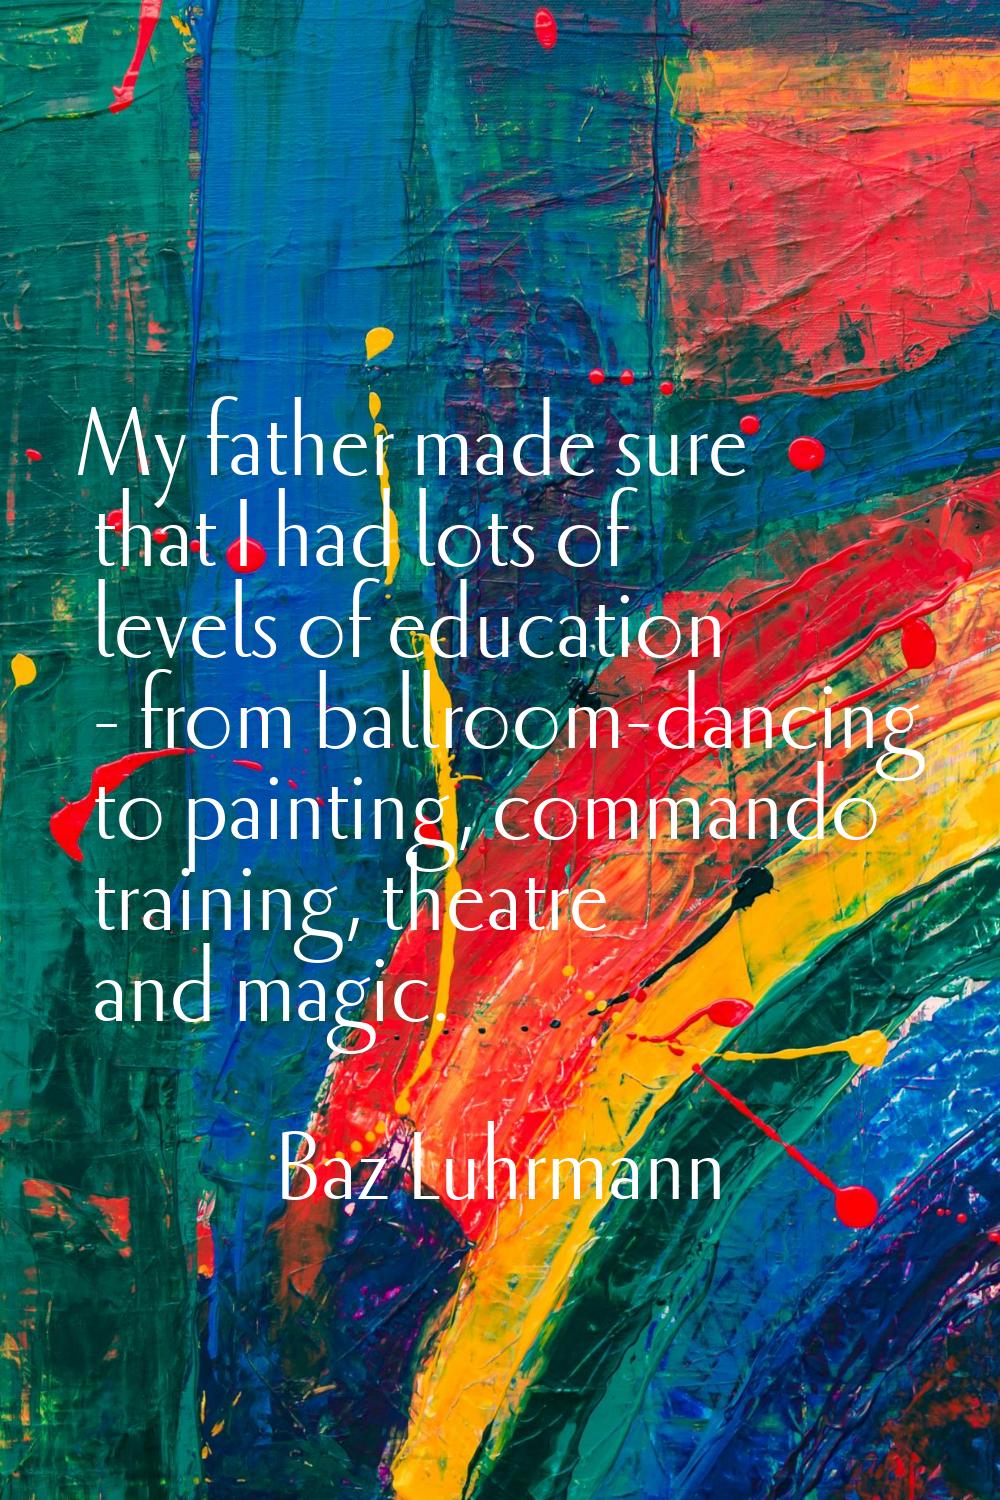 My father made sure that I had lots of levels of education - from ballroom-dancing to painting, com